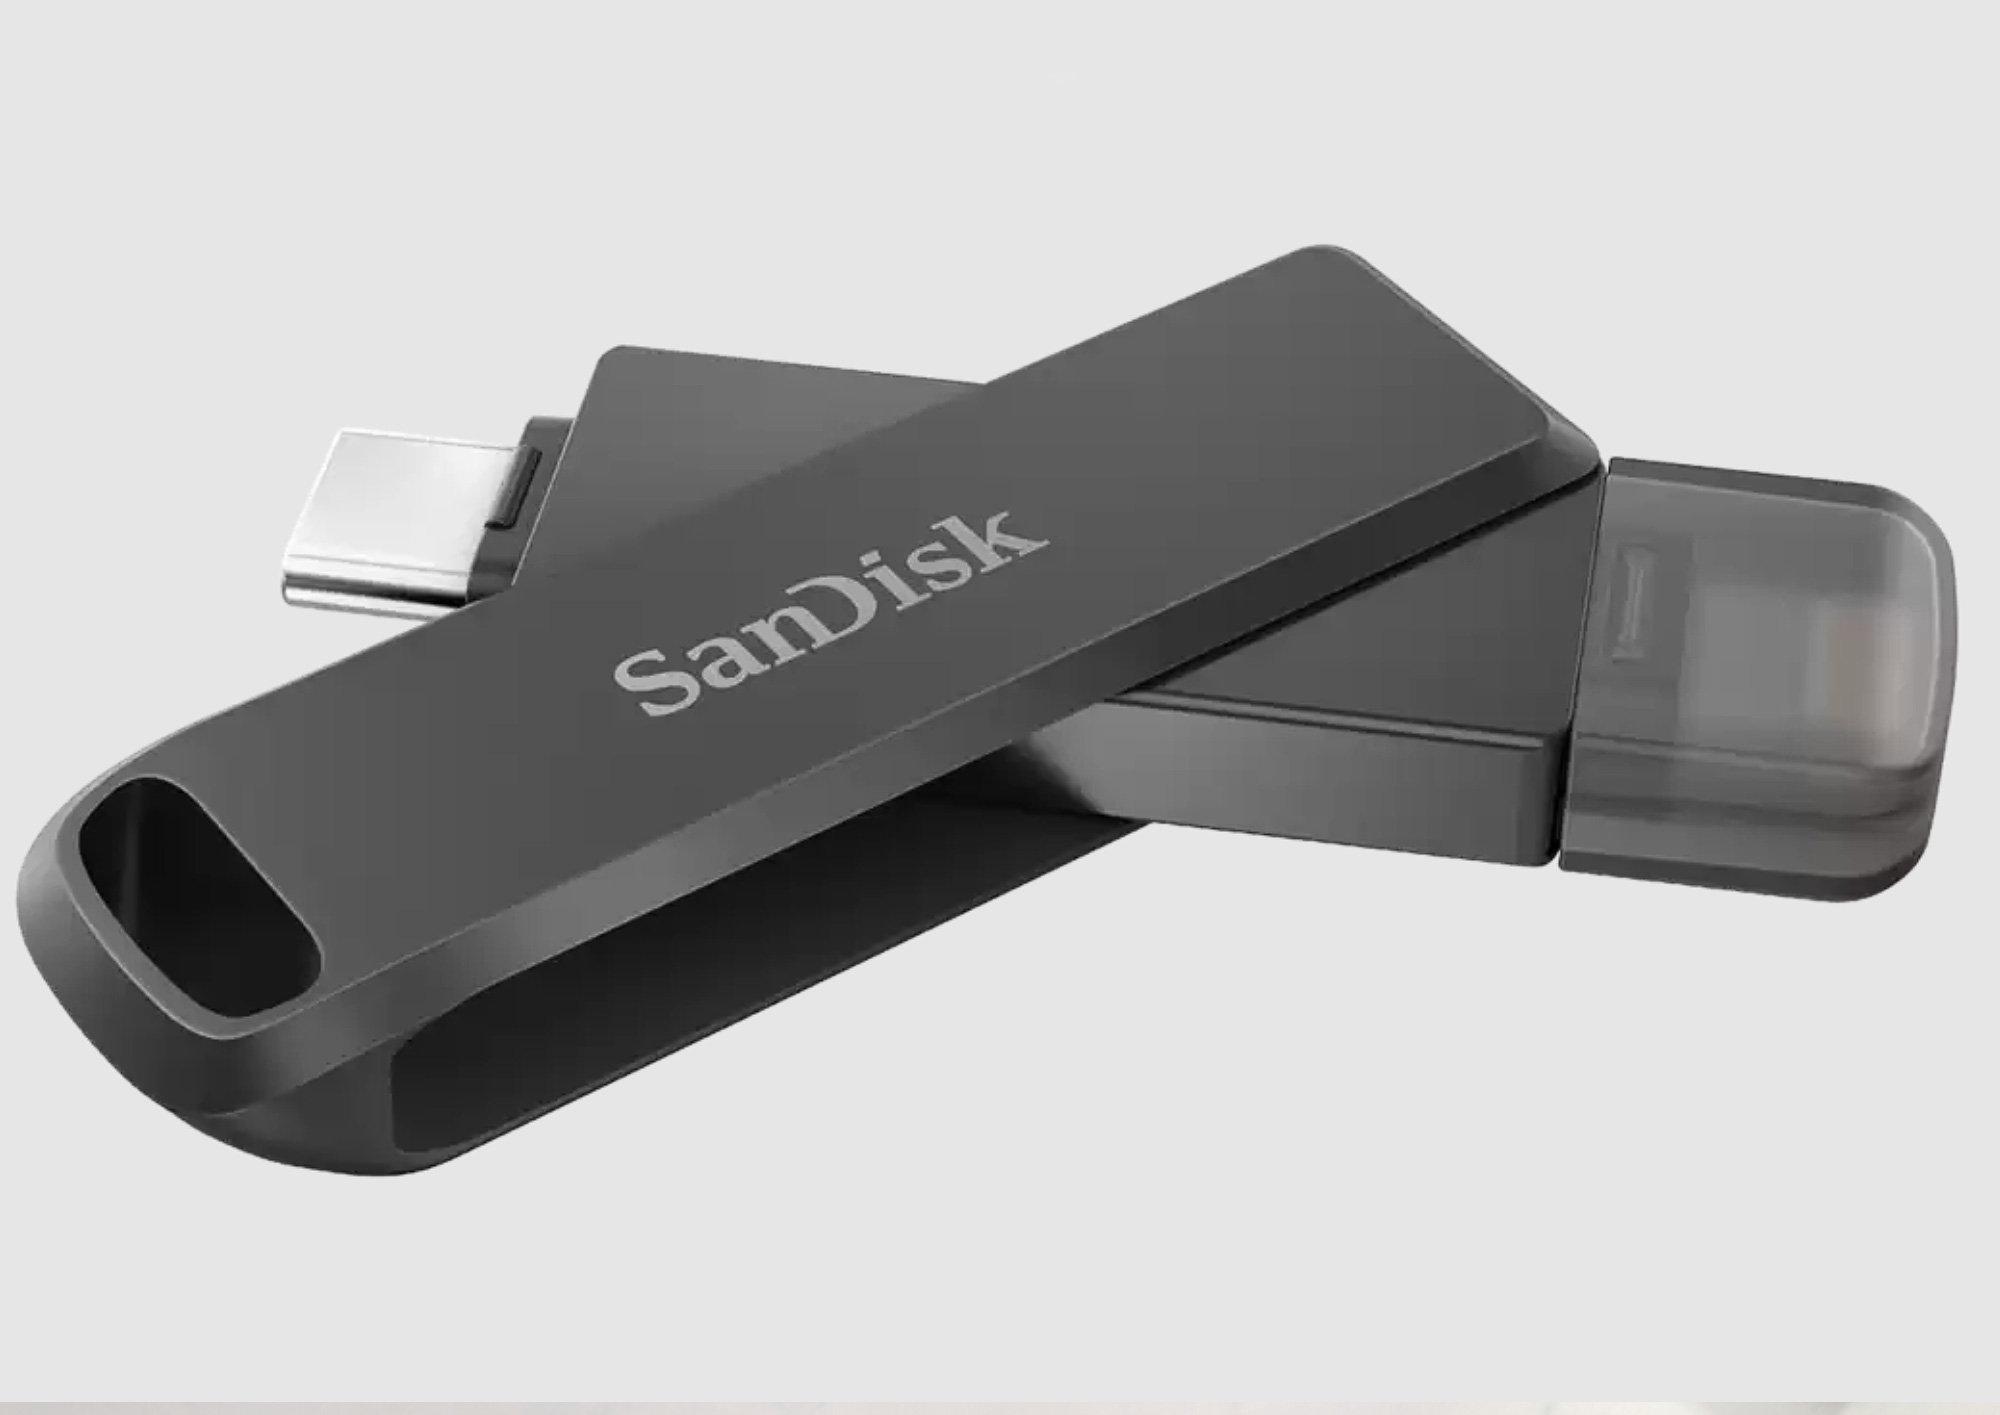 SanDisk's USB Type-C drive for iPhone and Android by Jose Antunes